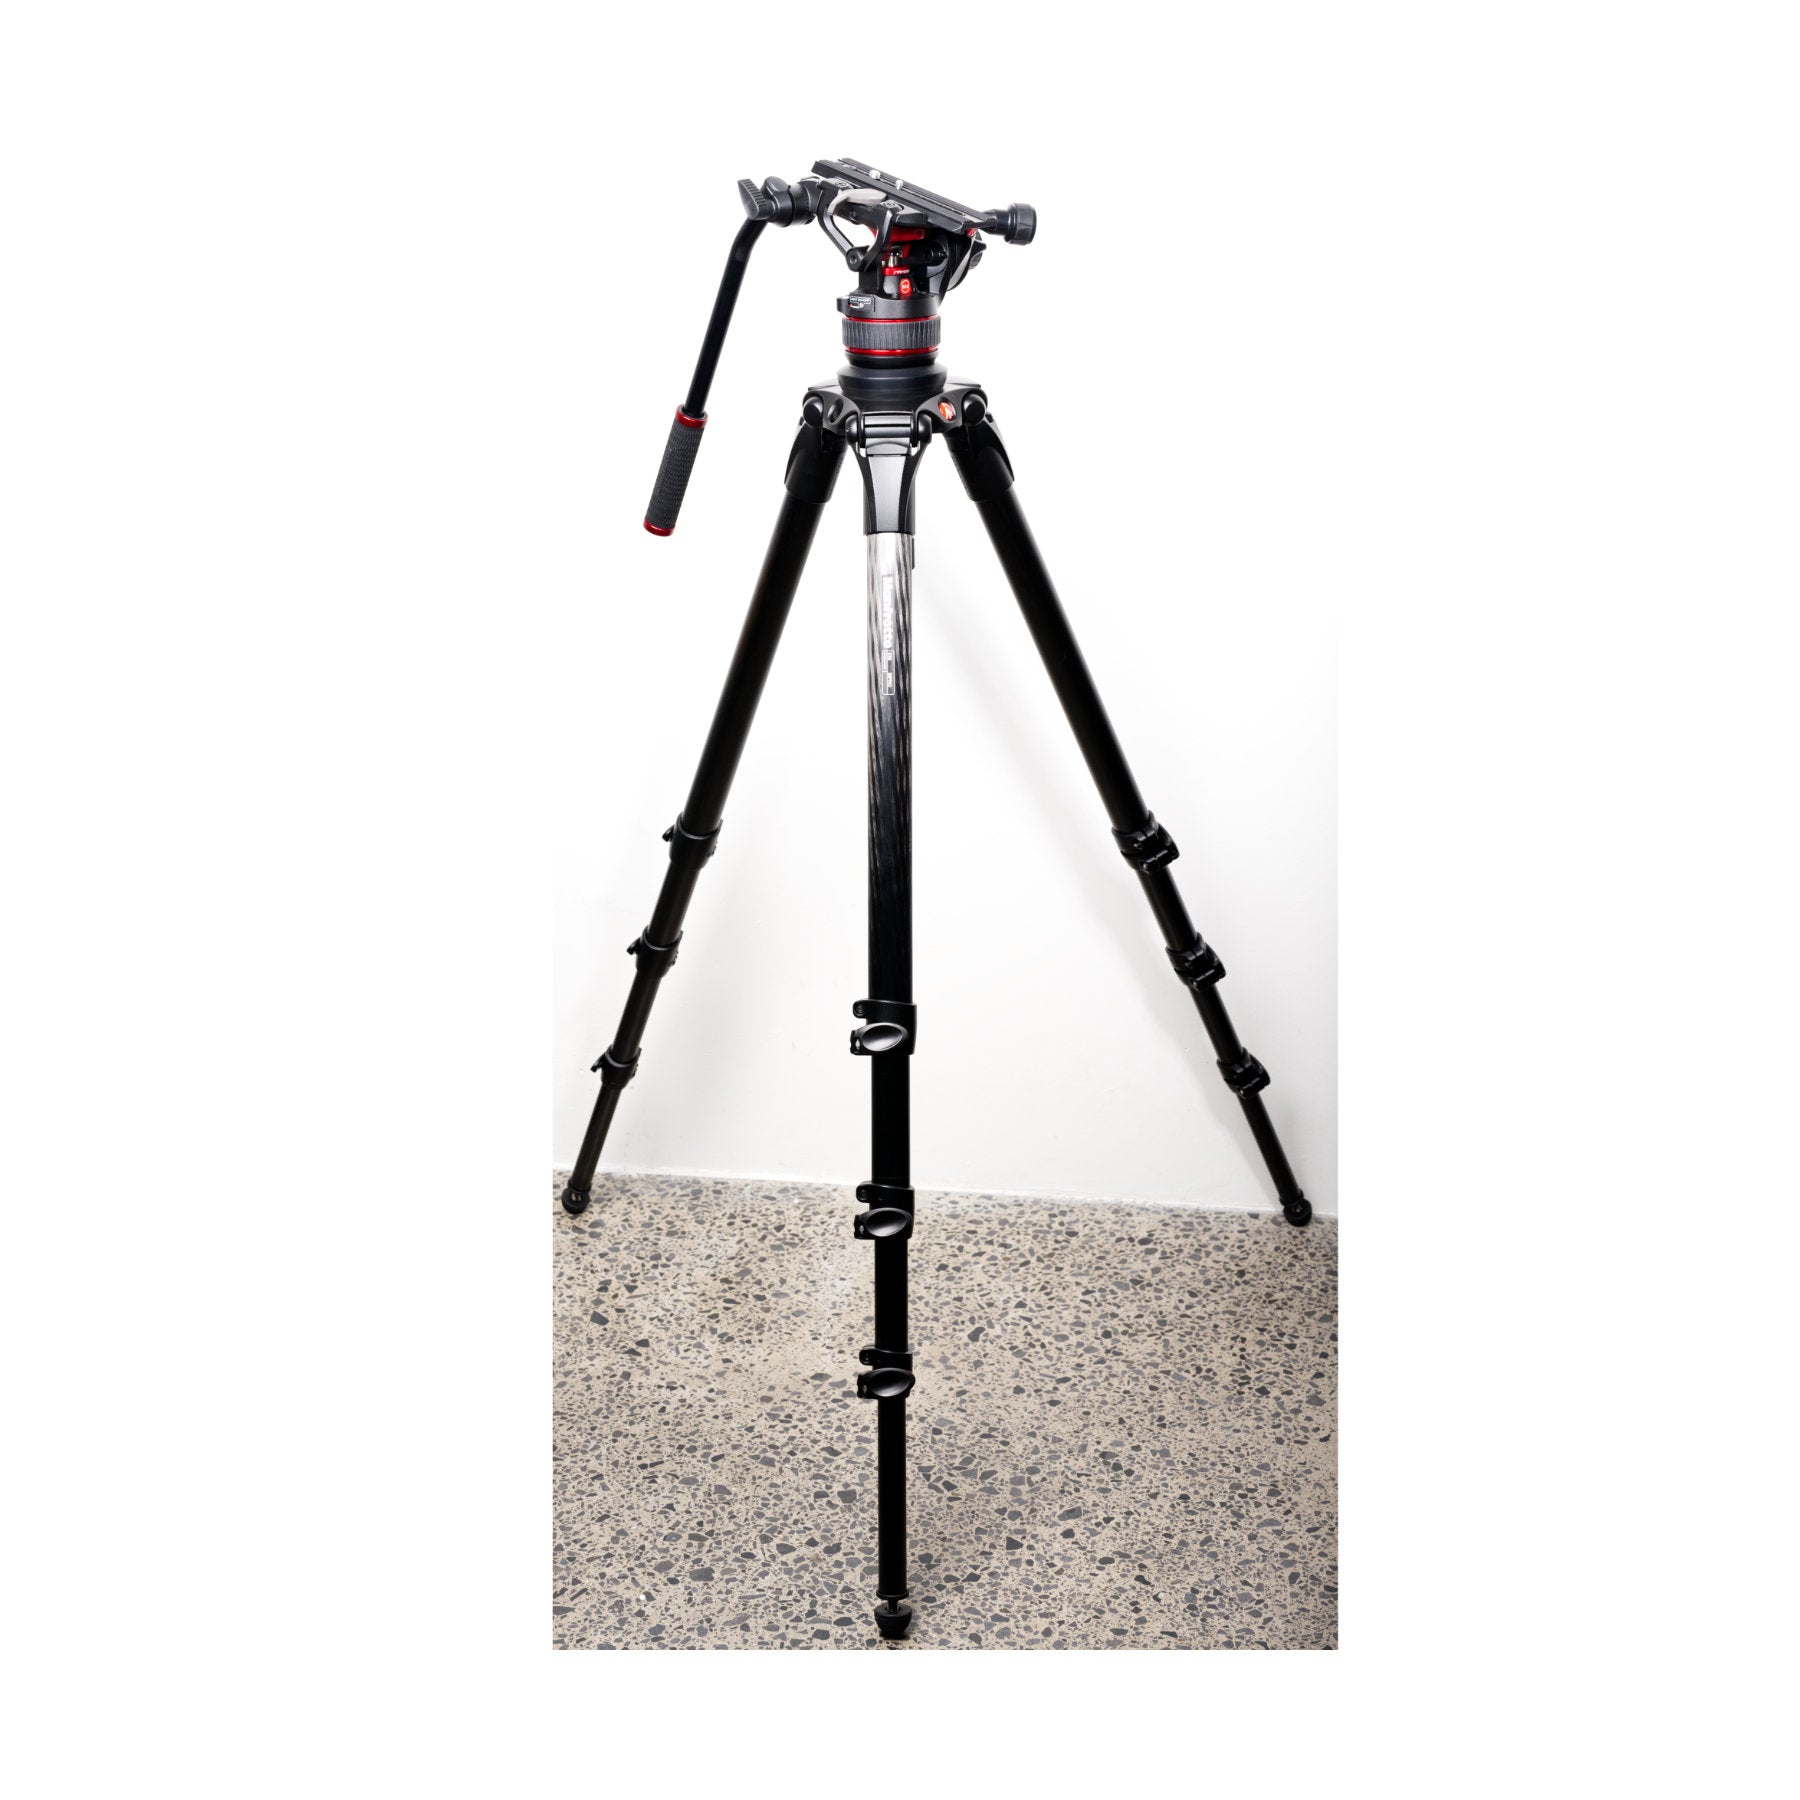 Buy second hand Nitrotech 612 video head, CF Tall Single Legs Tripod at Topic Store